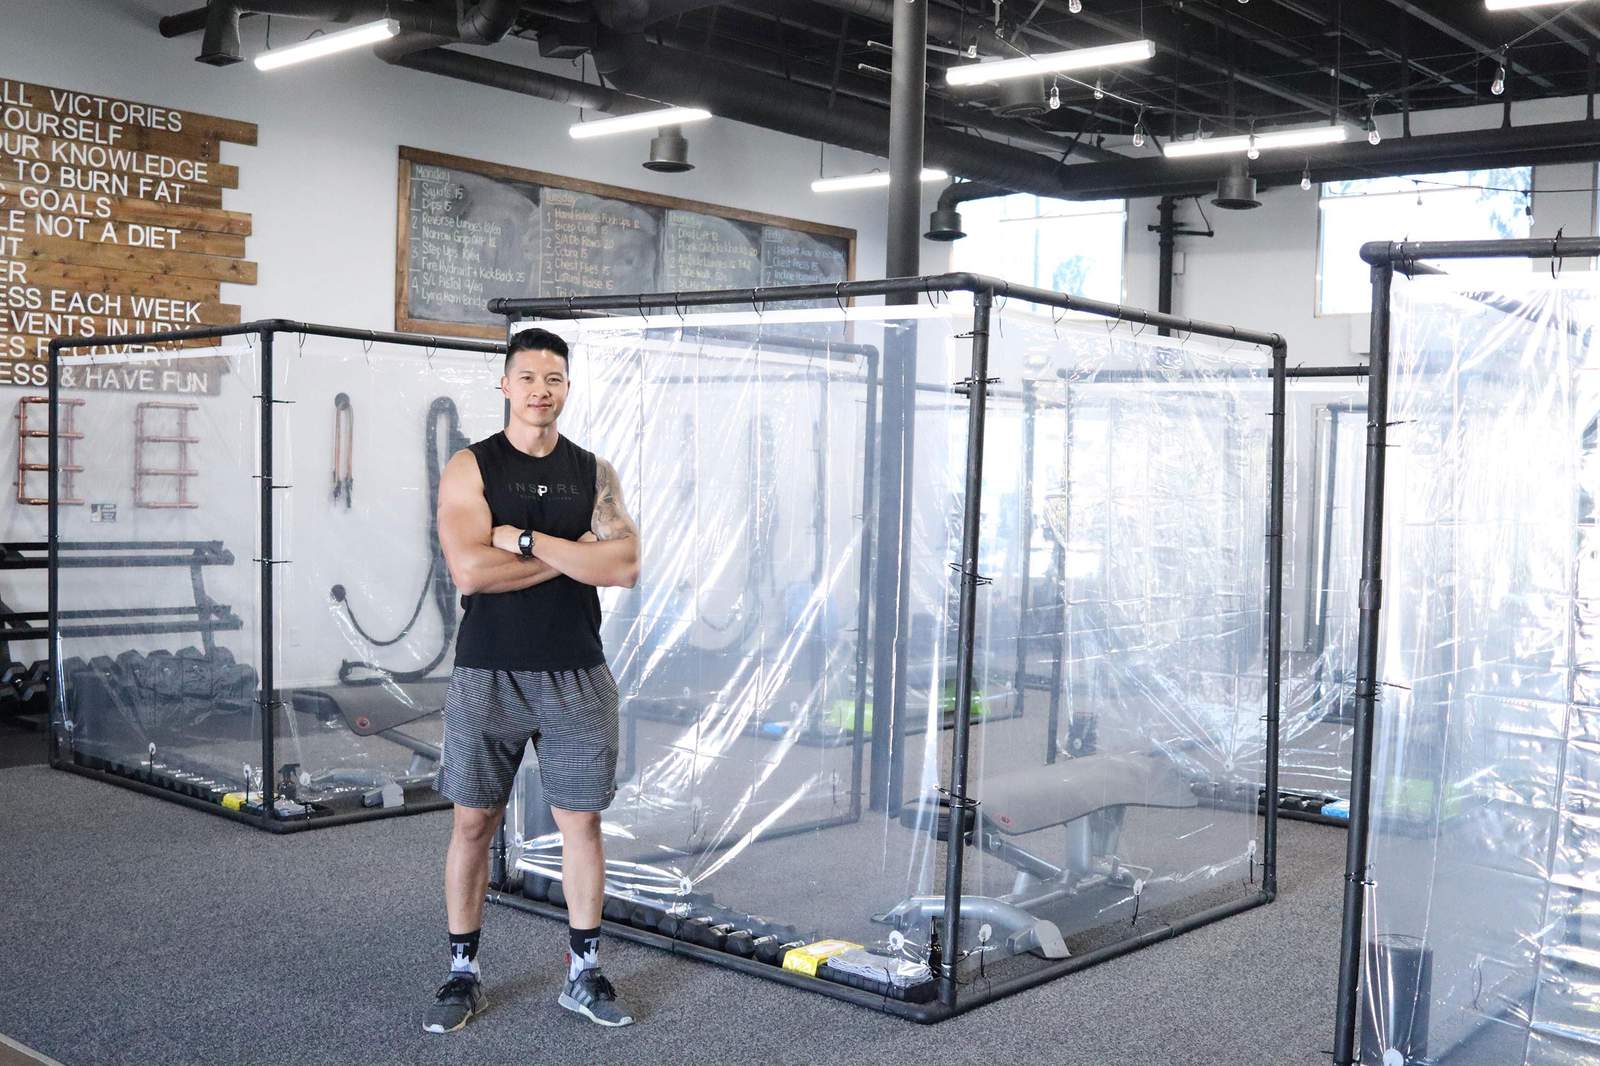 A gym is using plastic pods to help members maintain social distancing during workouts